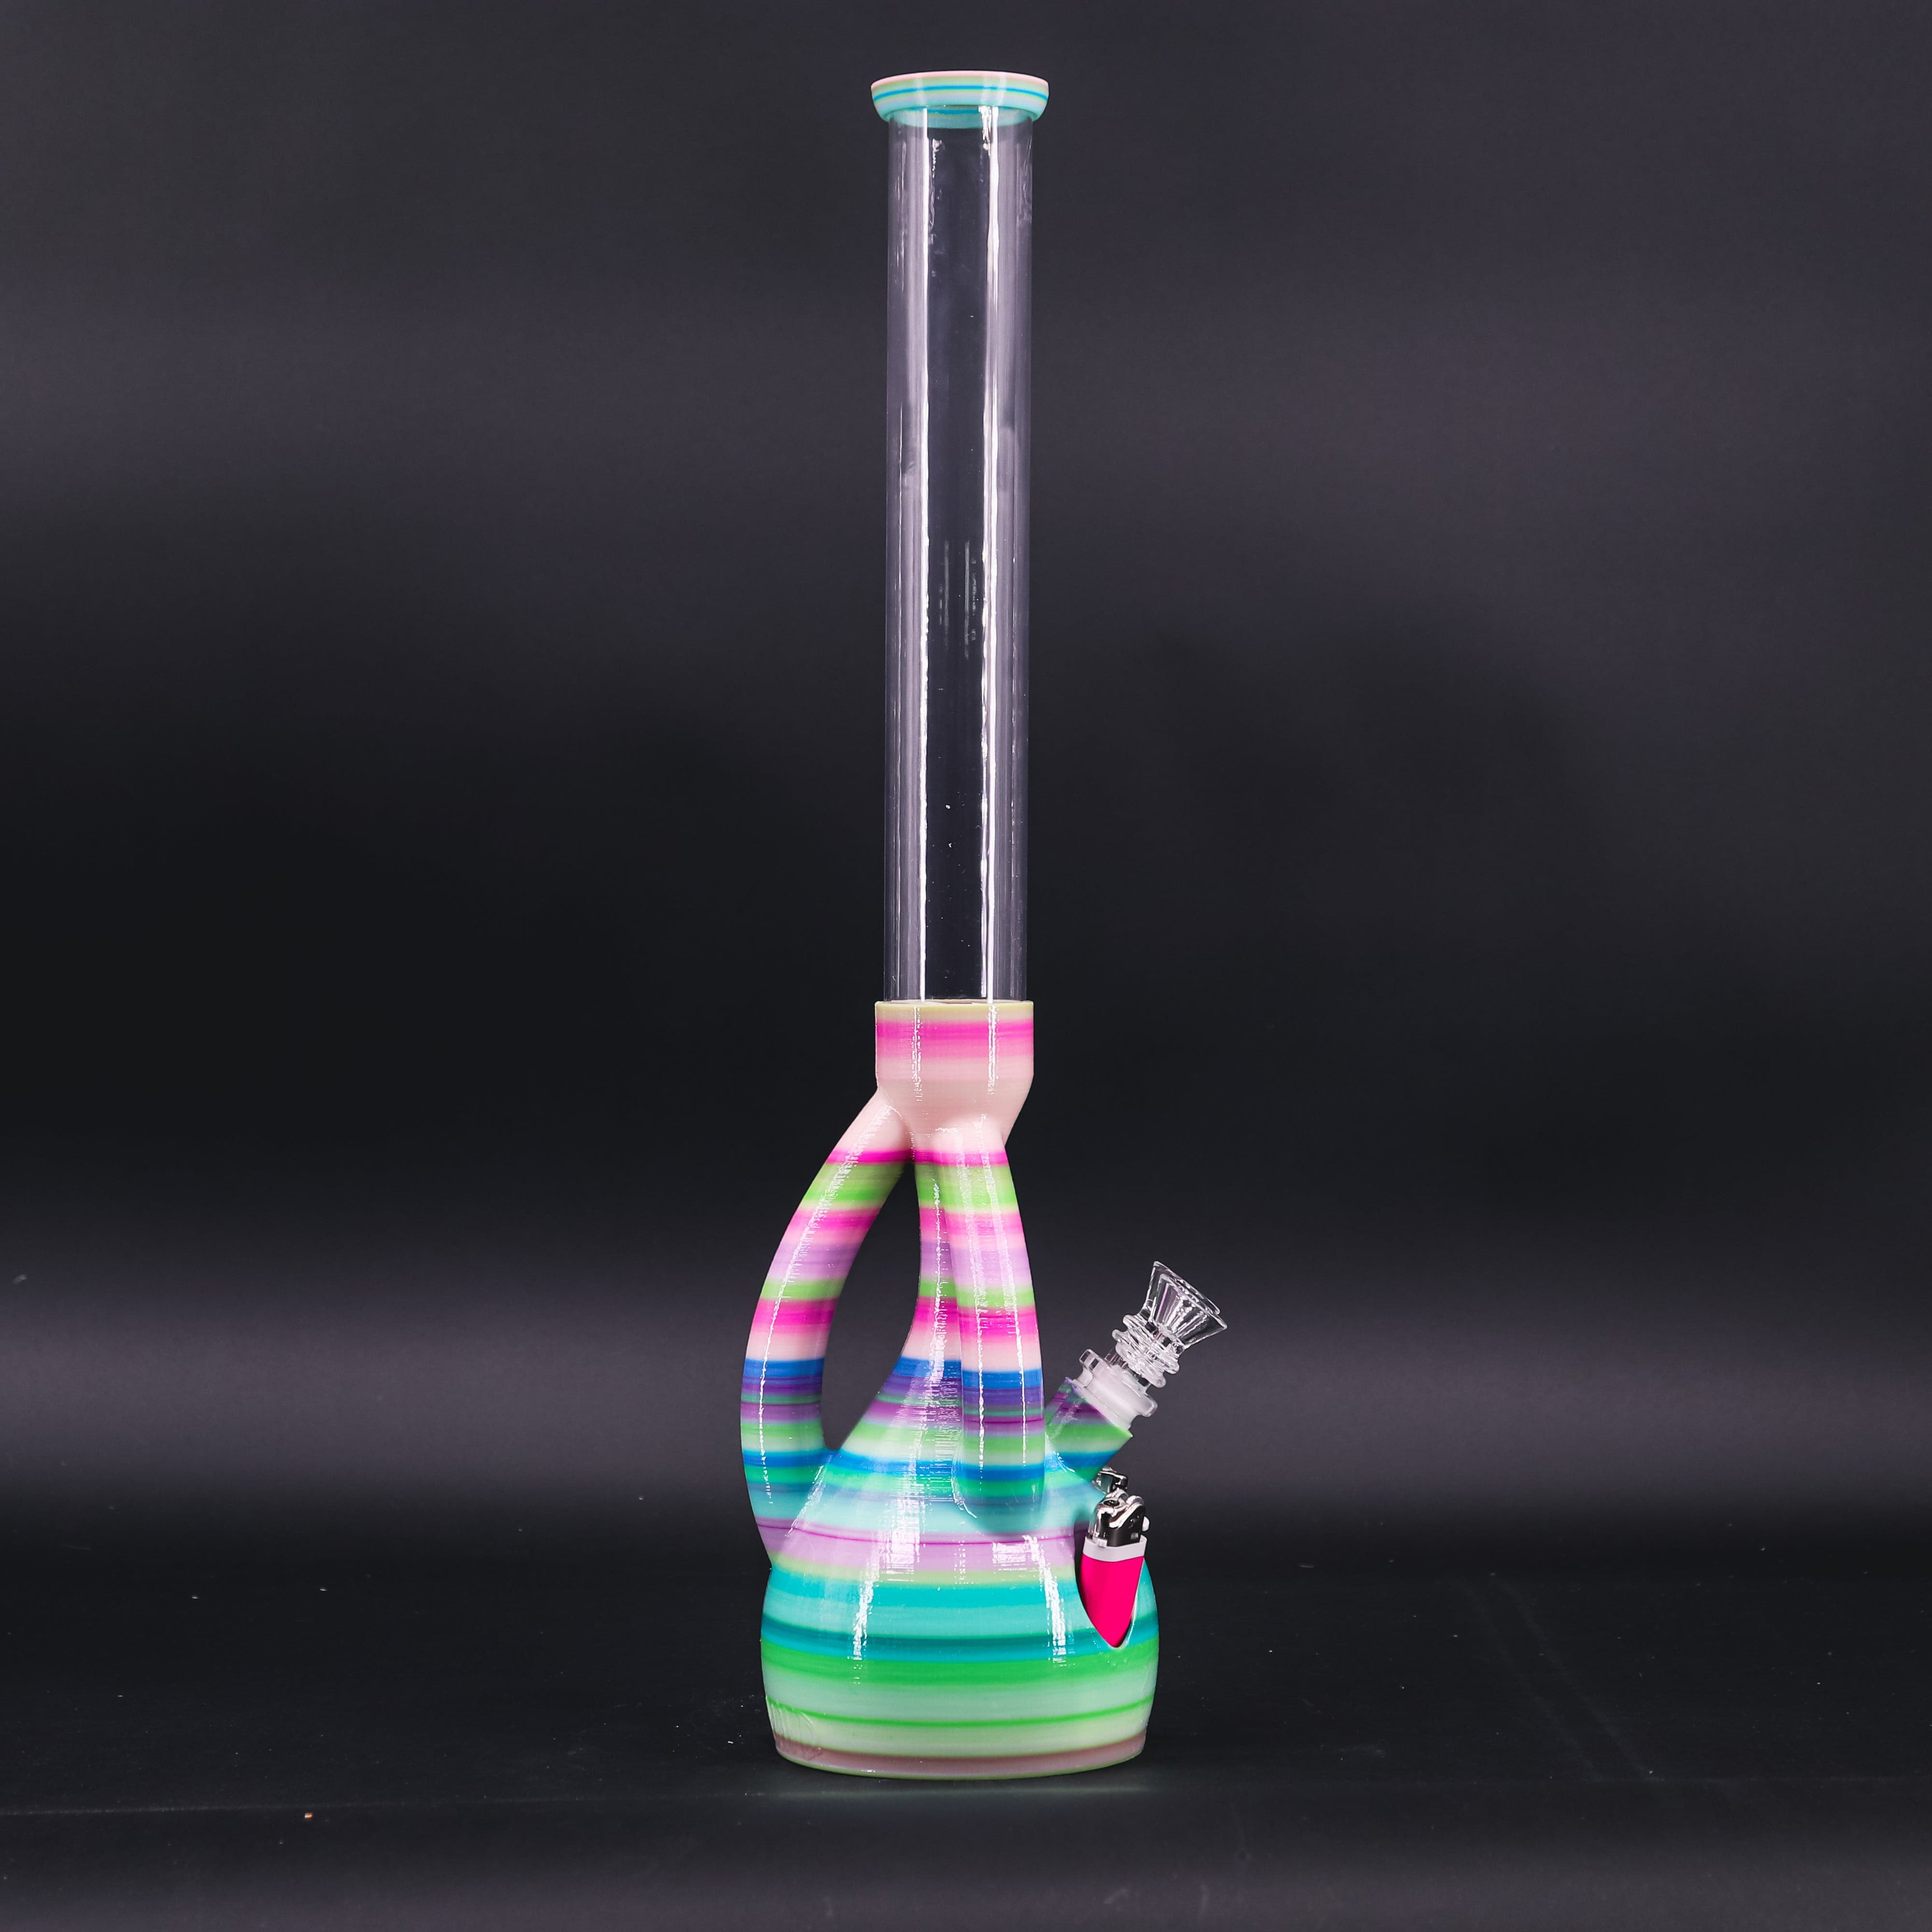 Summertime Bubble Gum color of The Duo - Amazing 3D Printed Water Pipe by Kayd Mayd.